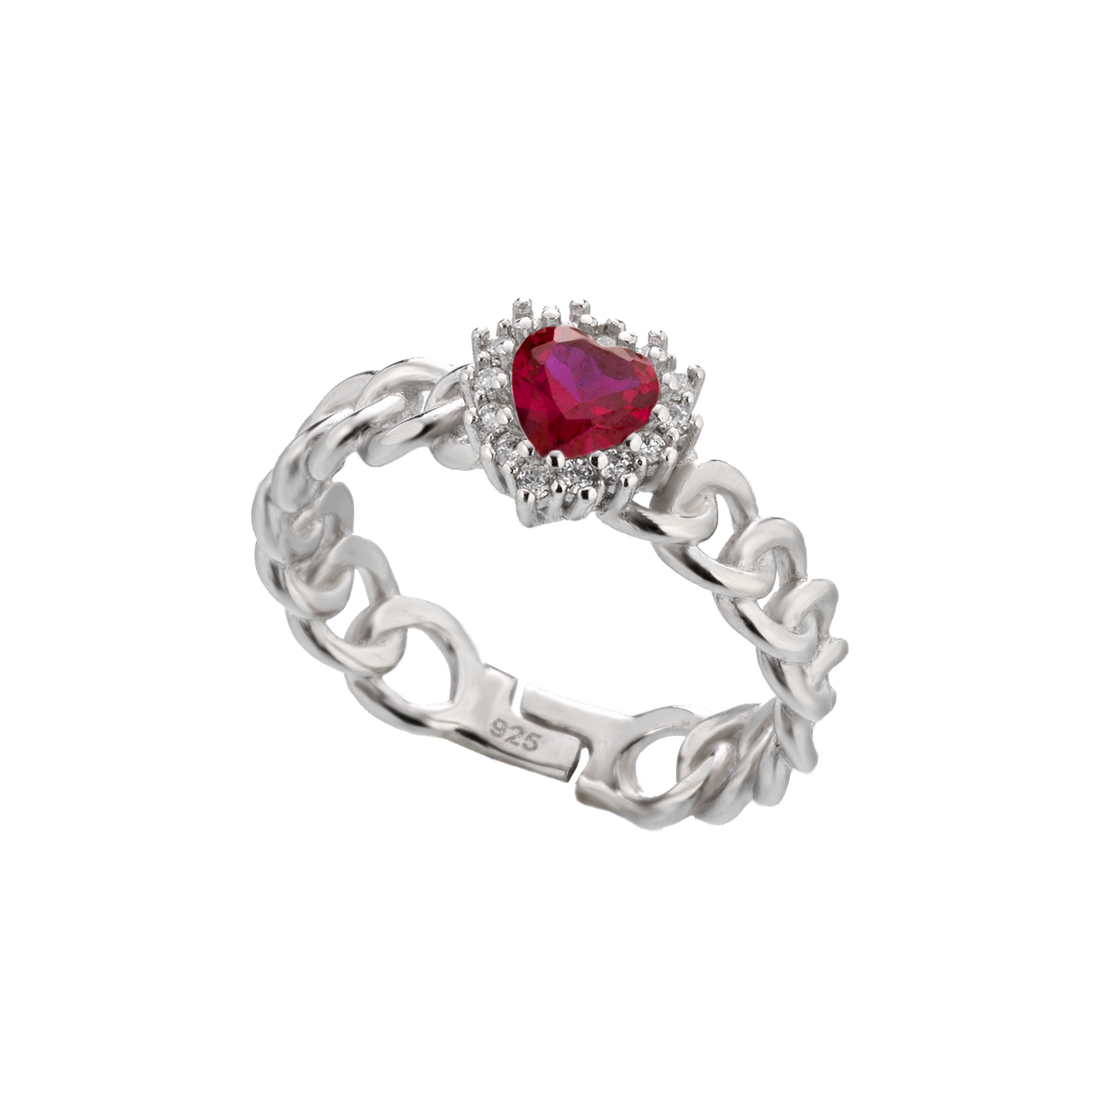 Fantasy Ring With Red Heart-shaped Zircon And Round Of White Zircons